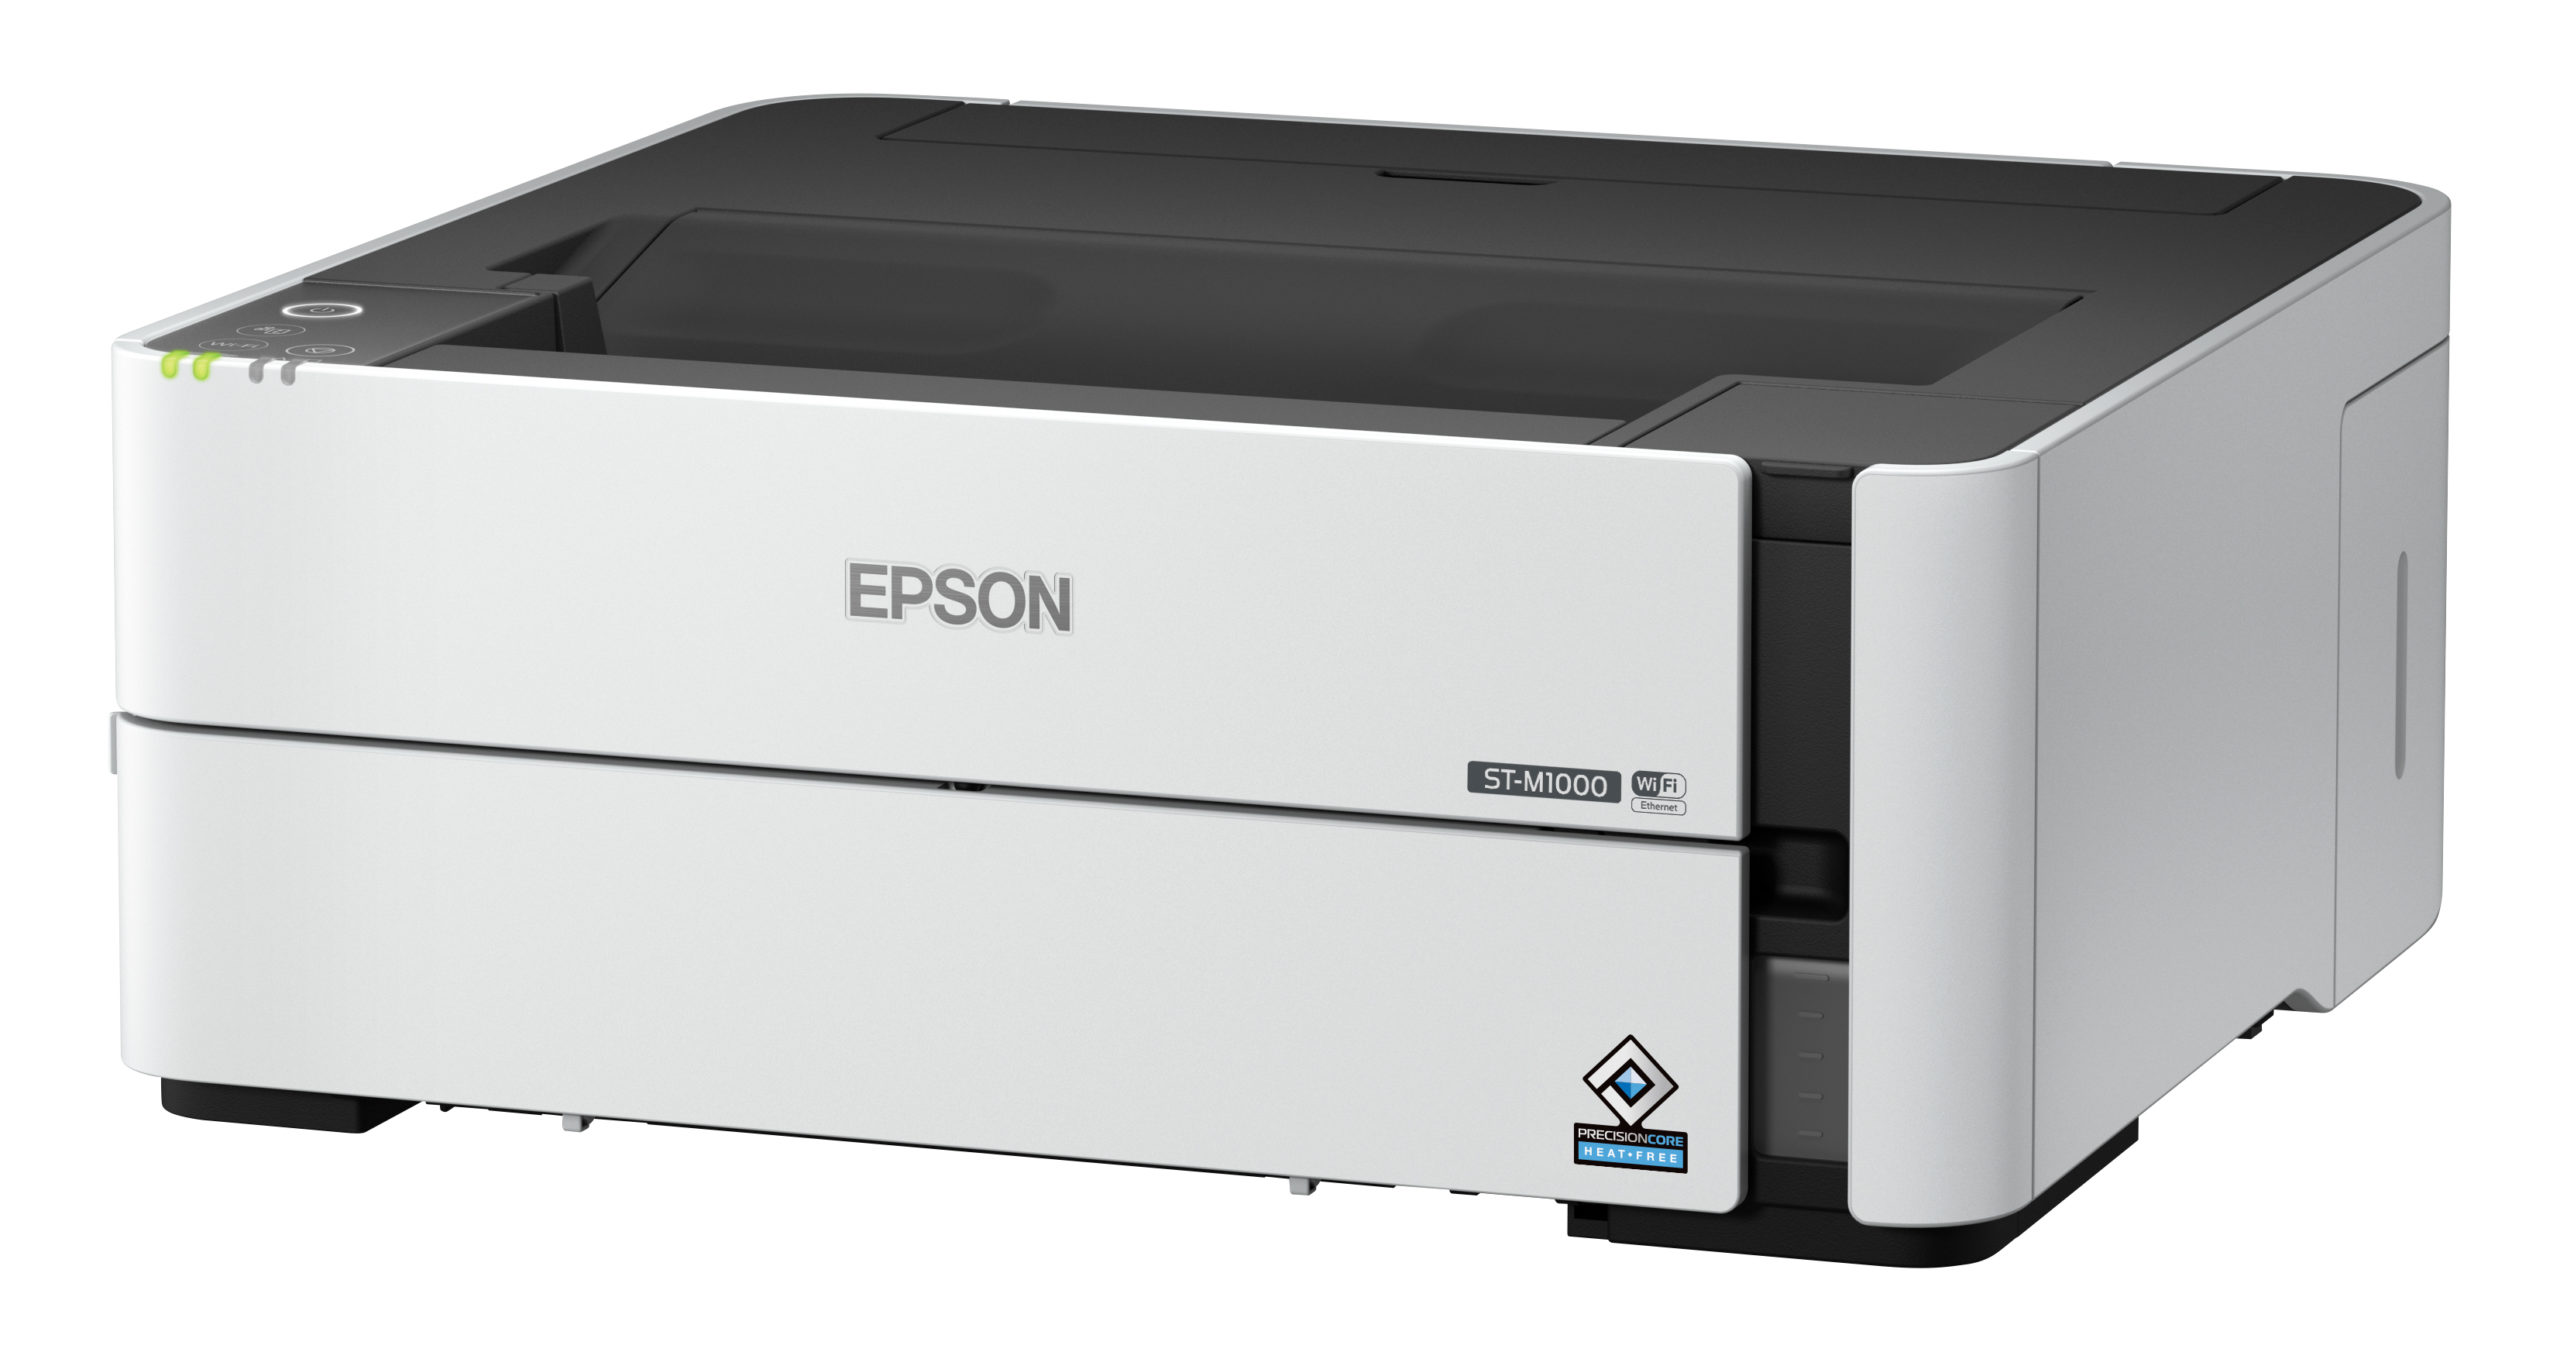 Epson Workforce WF-2860 All-in-One Wireless Color Printer with Scanner,  Copier, Fax, Ethernet, Wi-Fi Direct